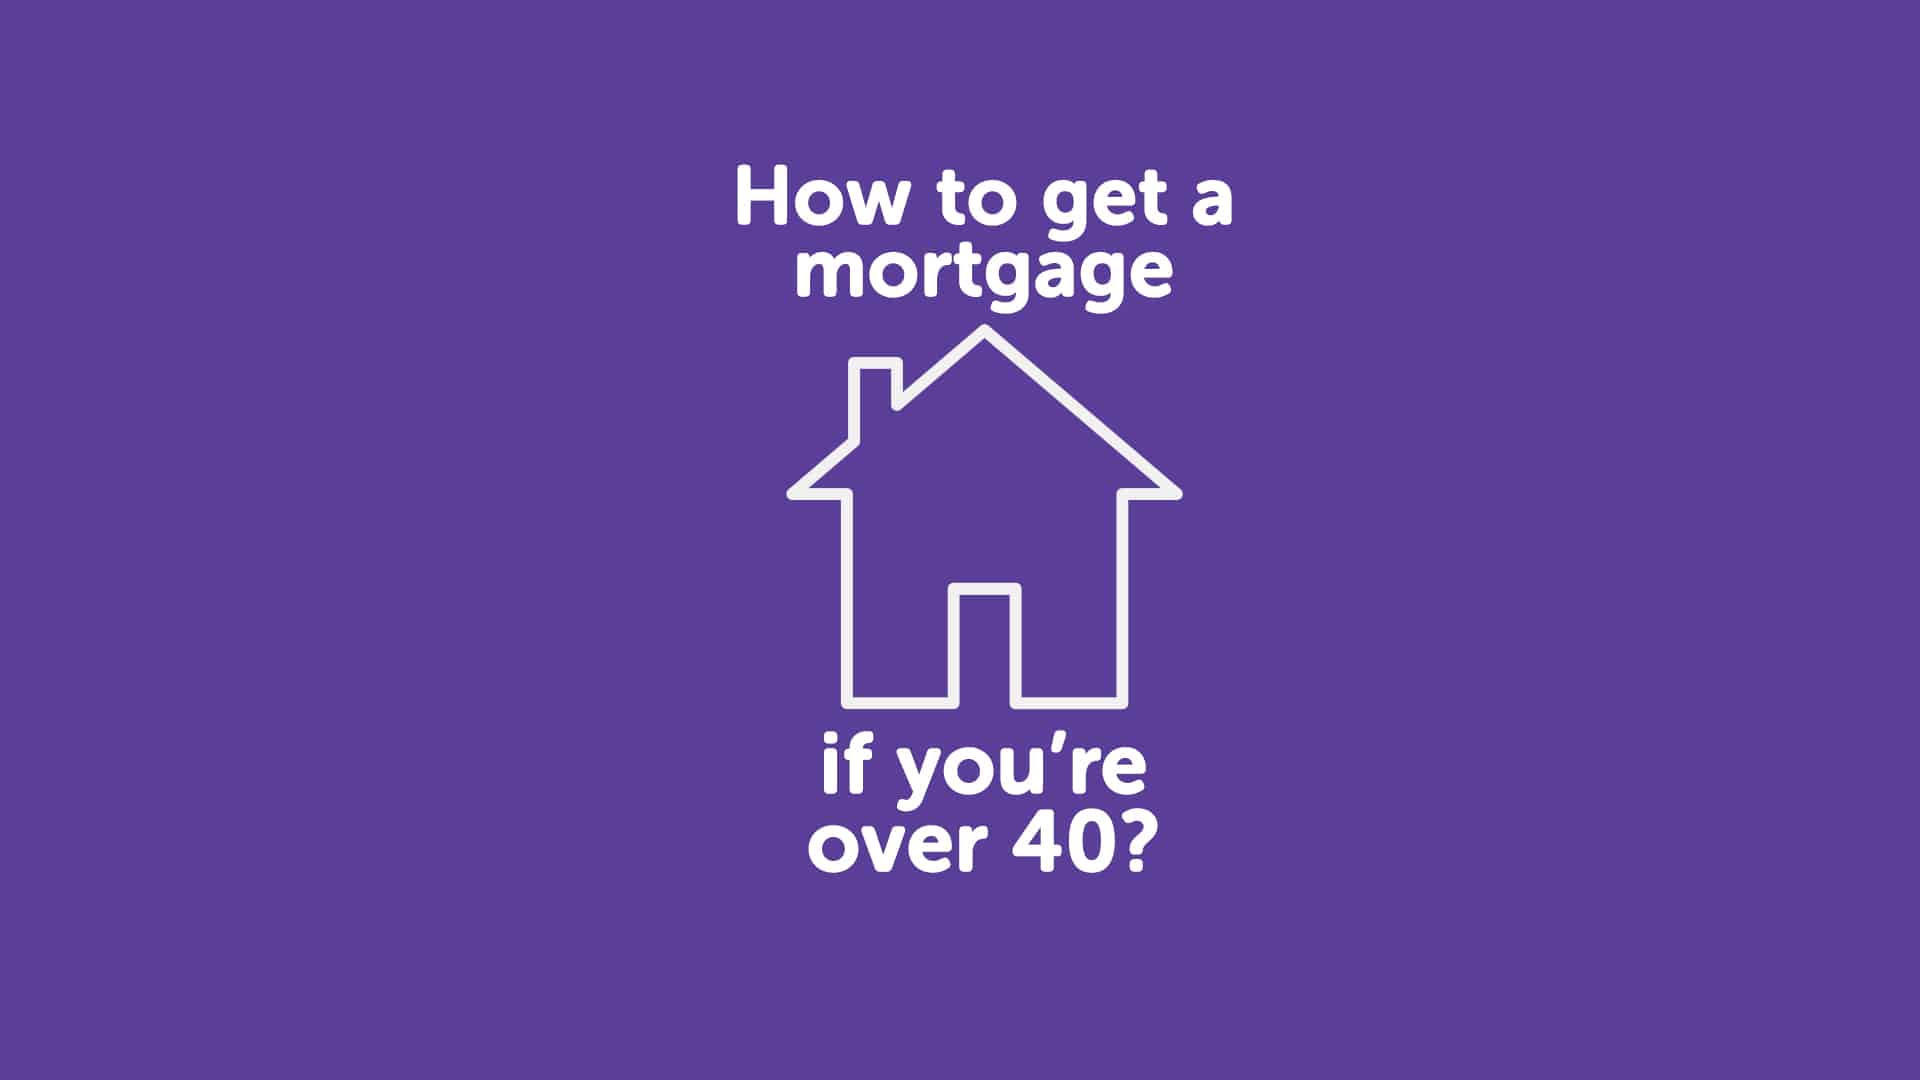 How to Get a Mortgage in Leeds if You're Over 40